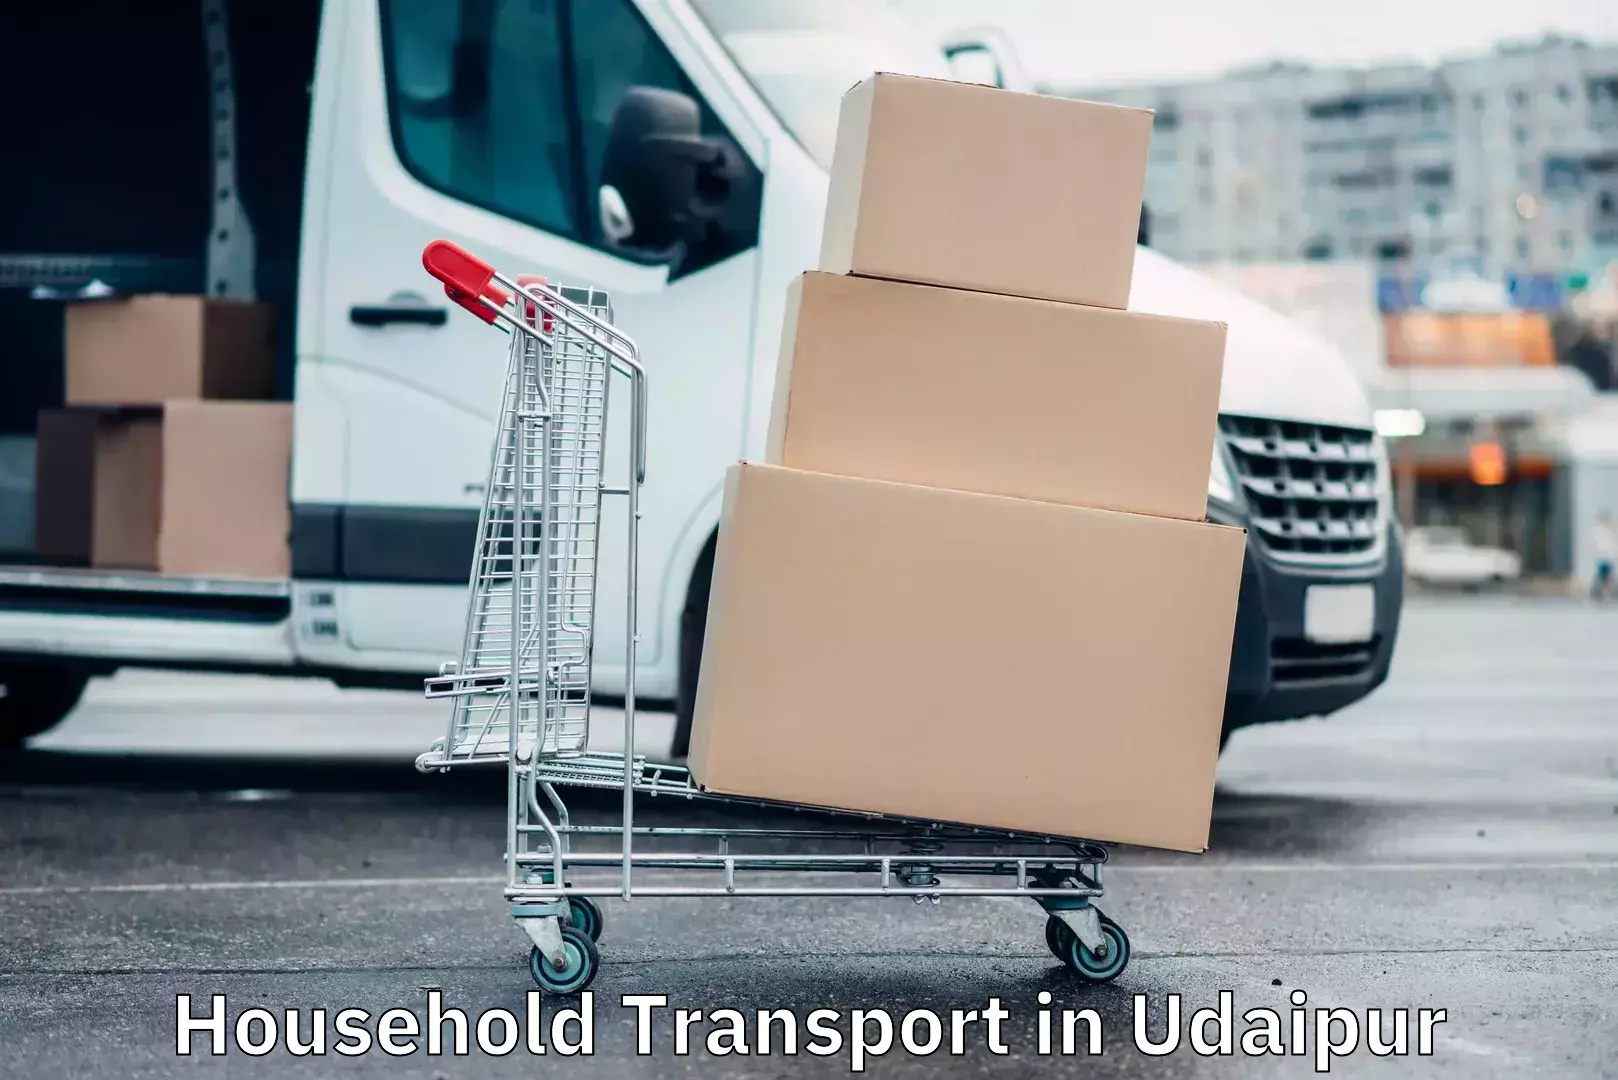 Furniture transport and logistics in Udaipur